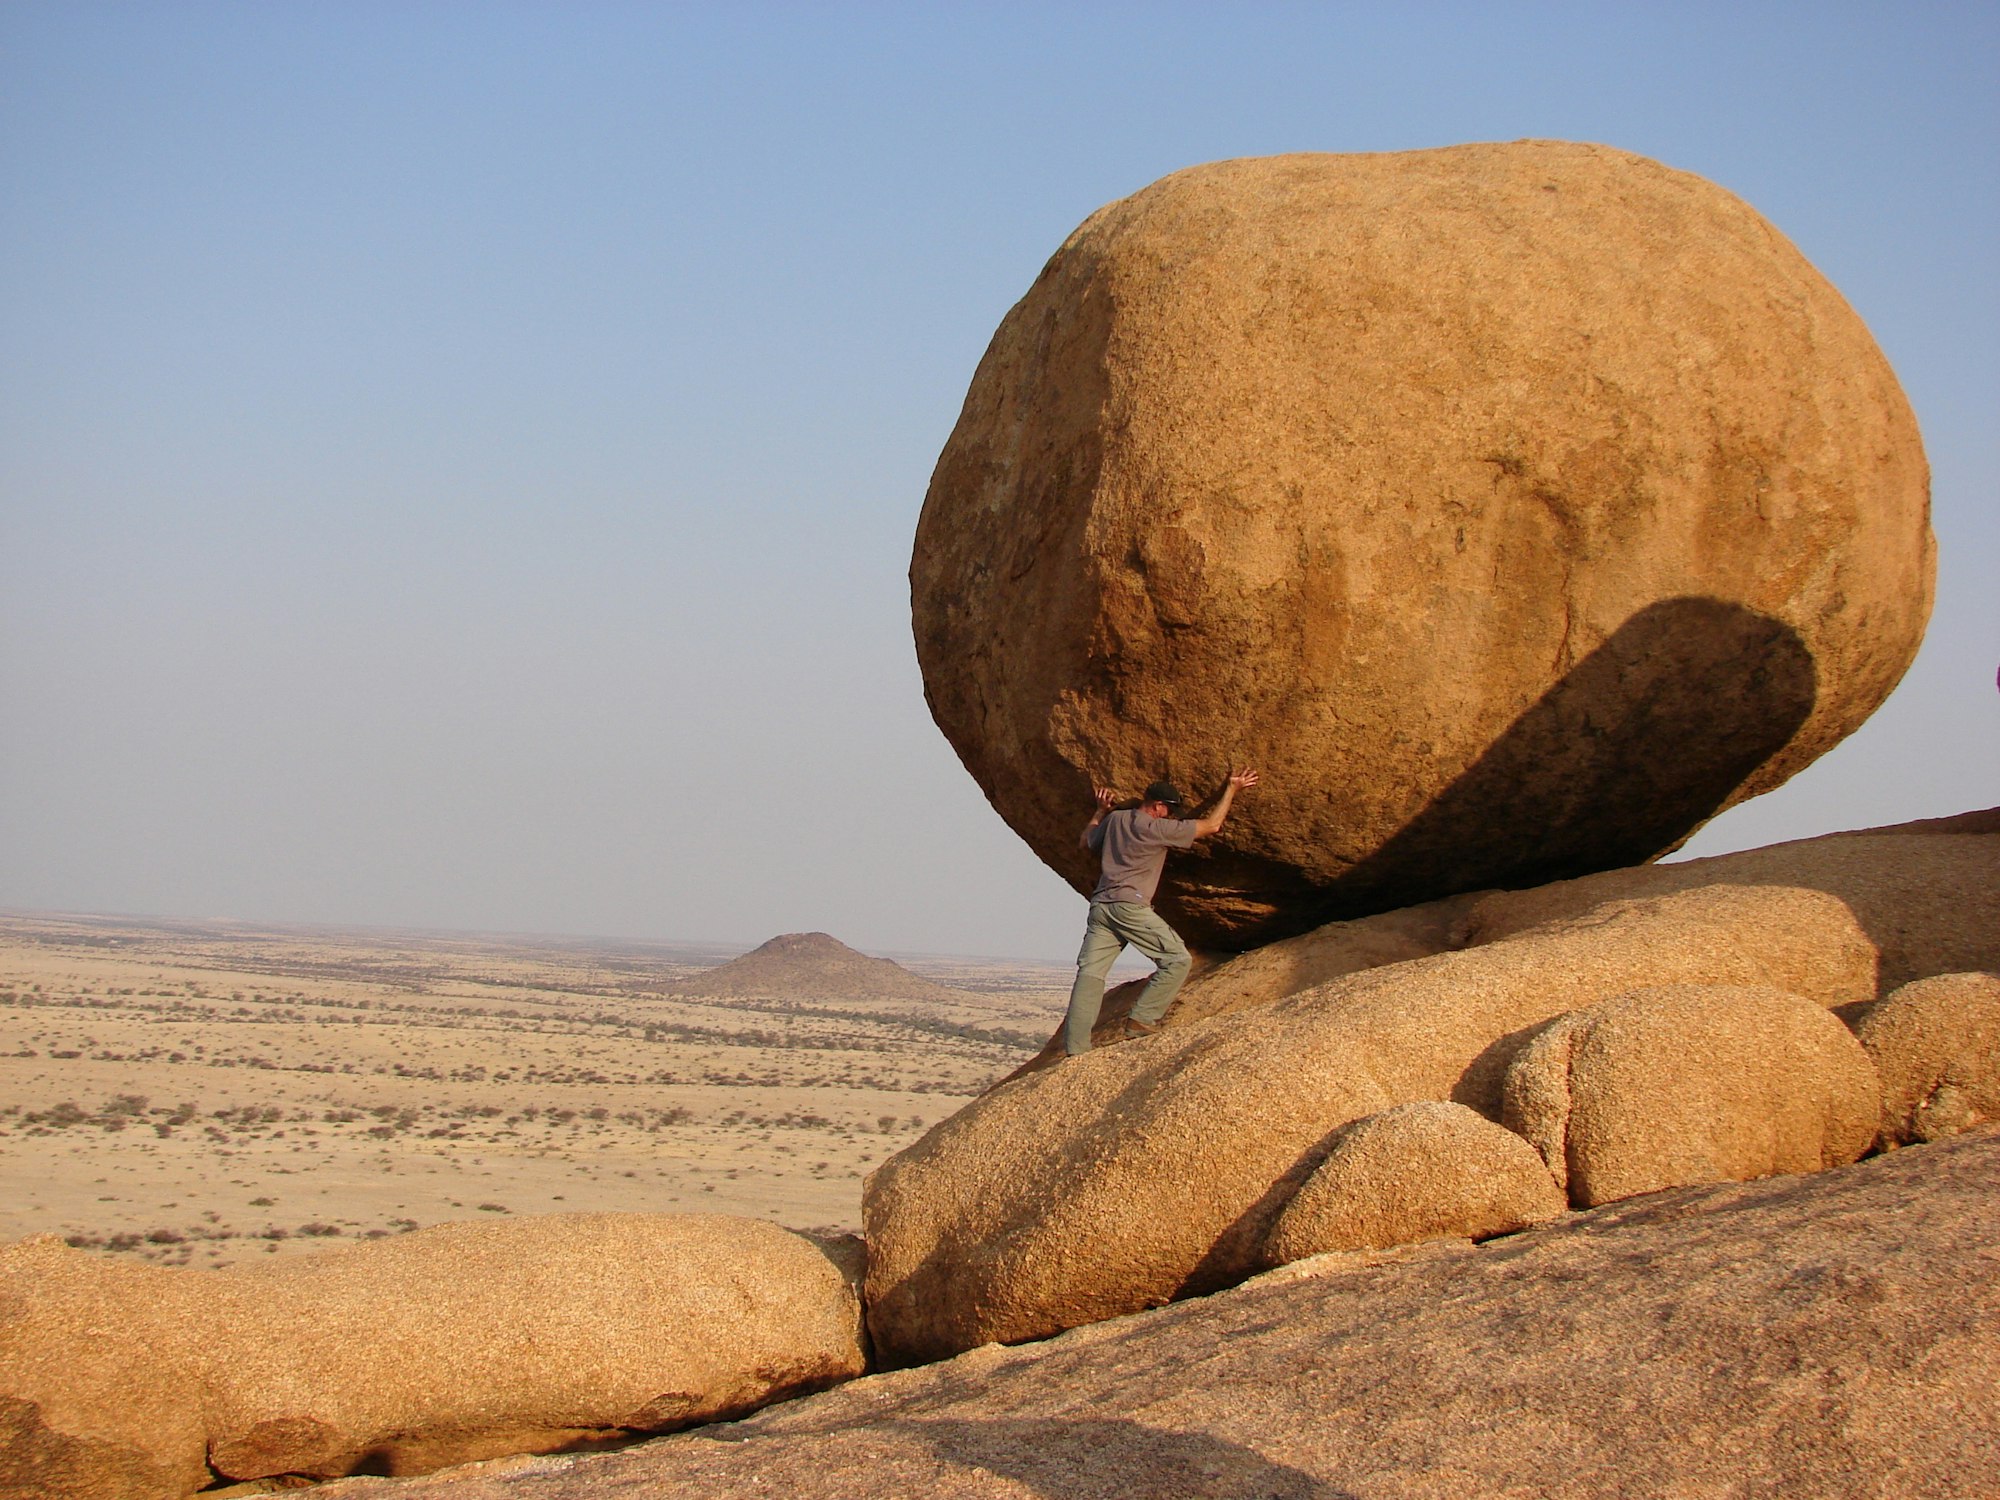 A person pretends to be pushing a boulder several times larger than him up a hill.